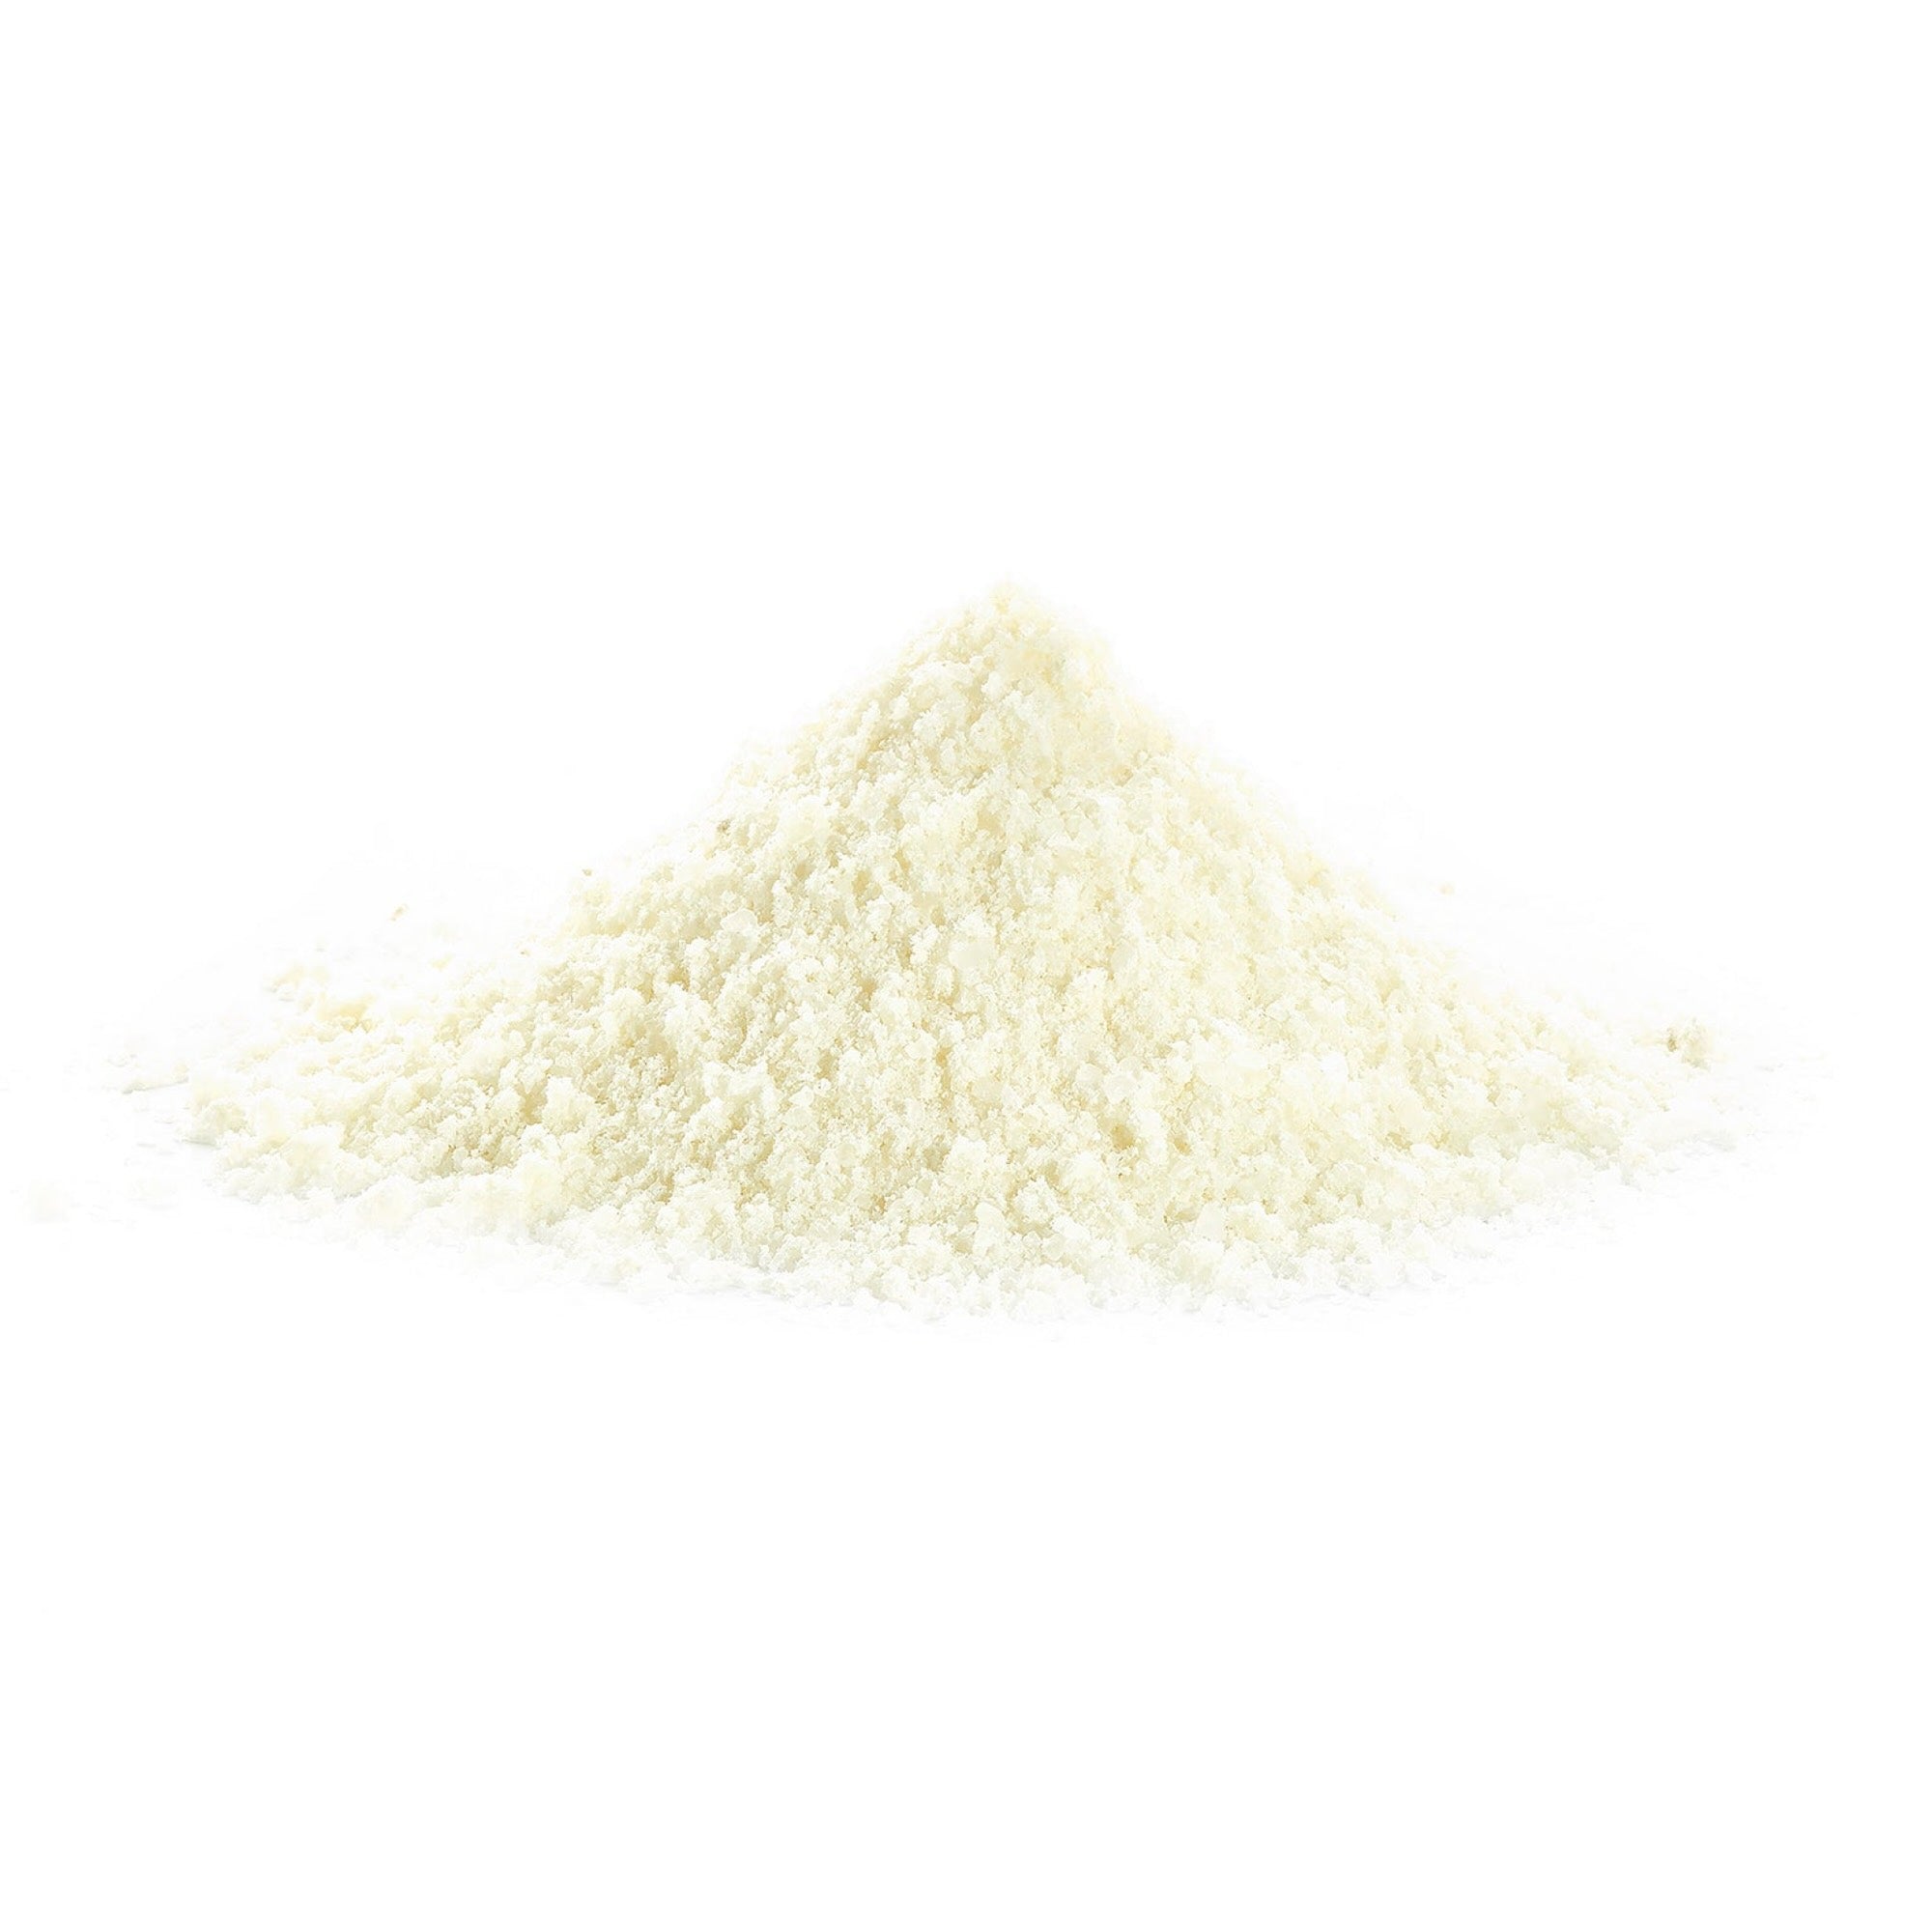 Image of the seaweed powder on a white background